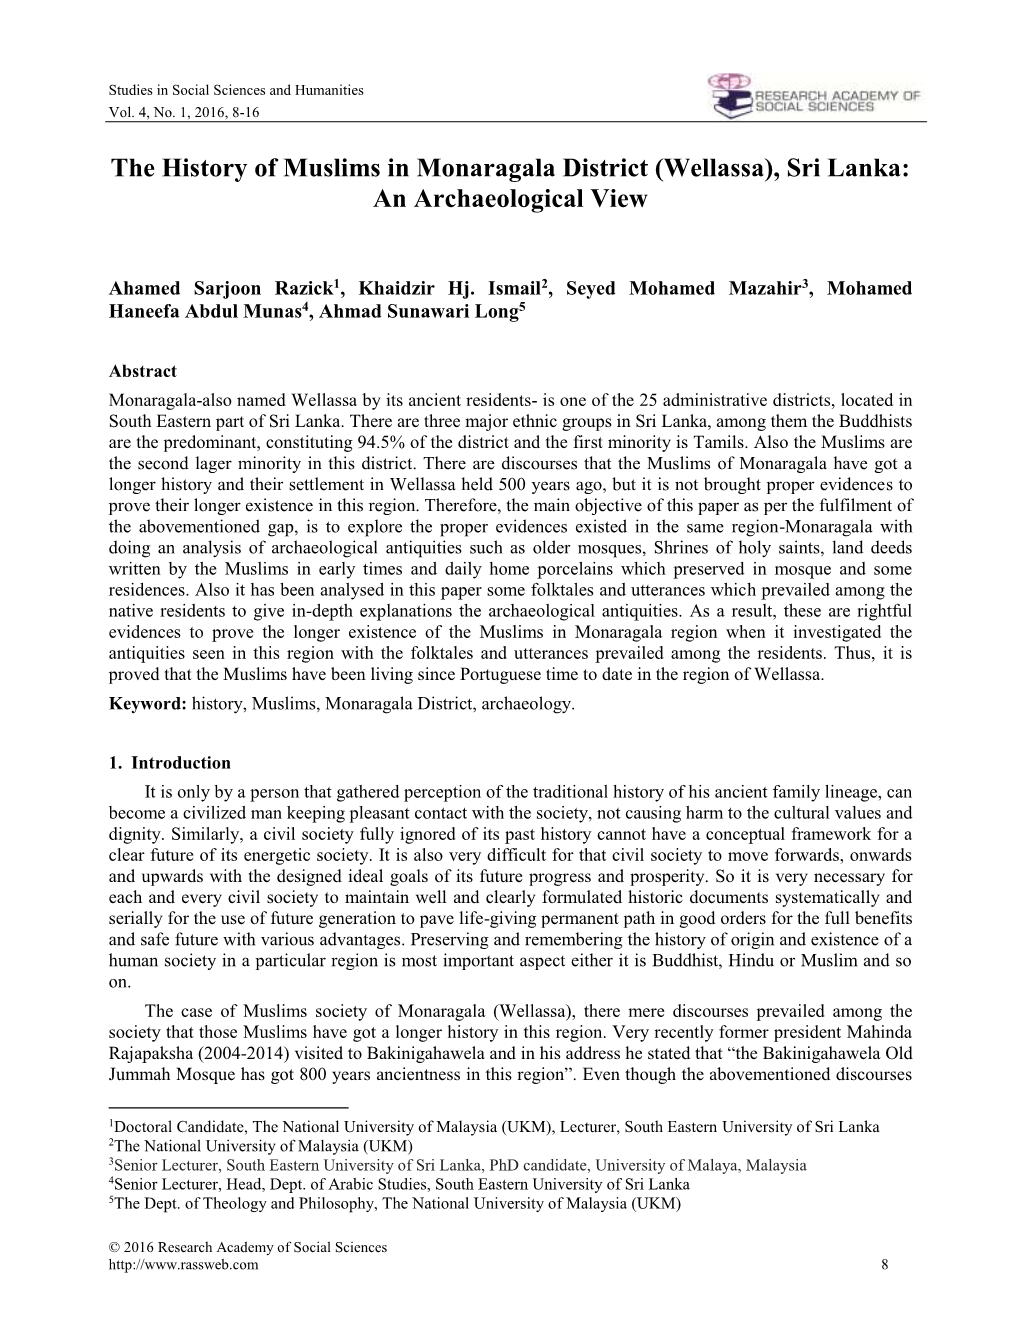 The History of Muslims in Monaragala District (Wellassa), Sri Lanka: an Archaeological View